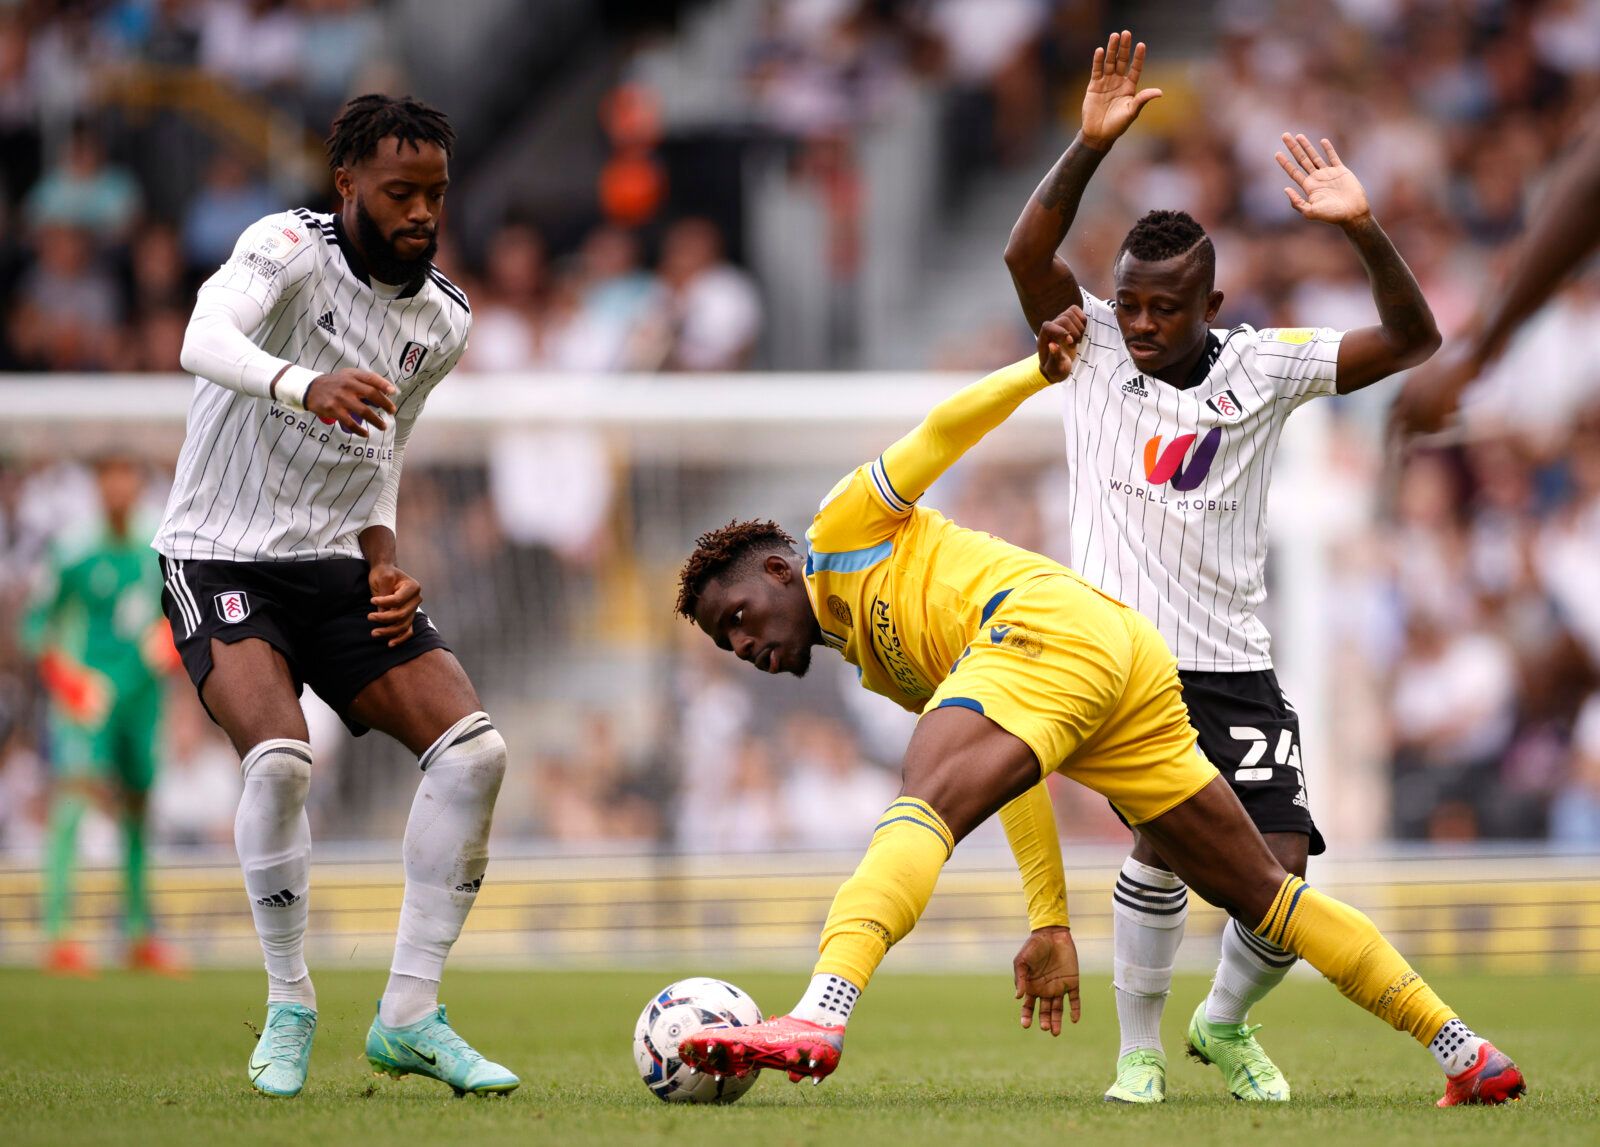 Soccer Football - Championship - Fulham v Reading - Craven Cottage, London, Britain - September 18, 2021 Reading's Tom Dele-Bashiru in action with Fulham’s Nathaniel Chalobah and Jean Michael Seri Action Images/John Sibley EDITORIAL USE ONLY. No use with unauthorized audio, video, data, fixture lists, club/league logos or 'live' services. Online in-match use limited to 75 images, no video emulation. No use in betting, games or single club /league/player publications.  Please contact your account